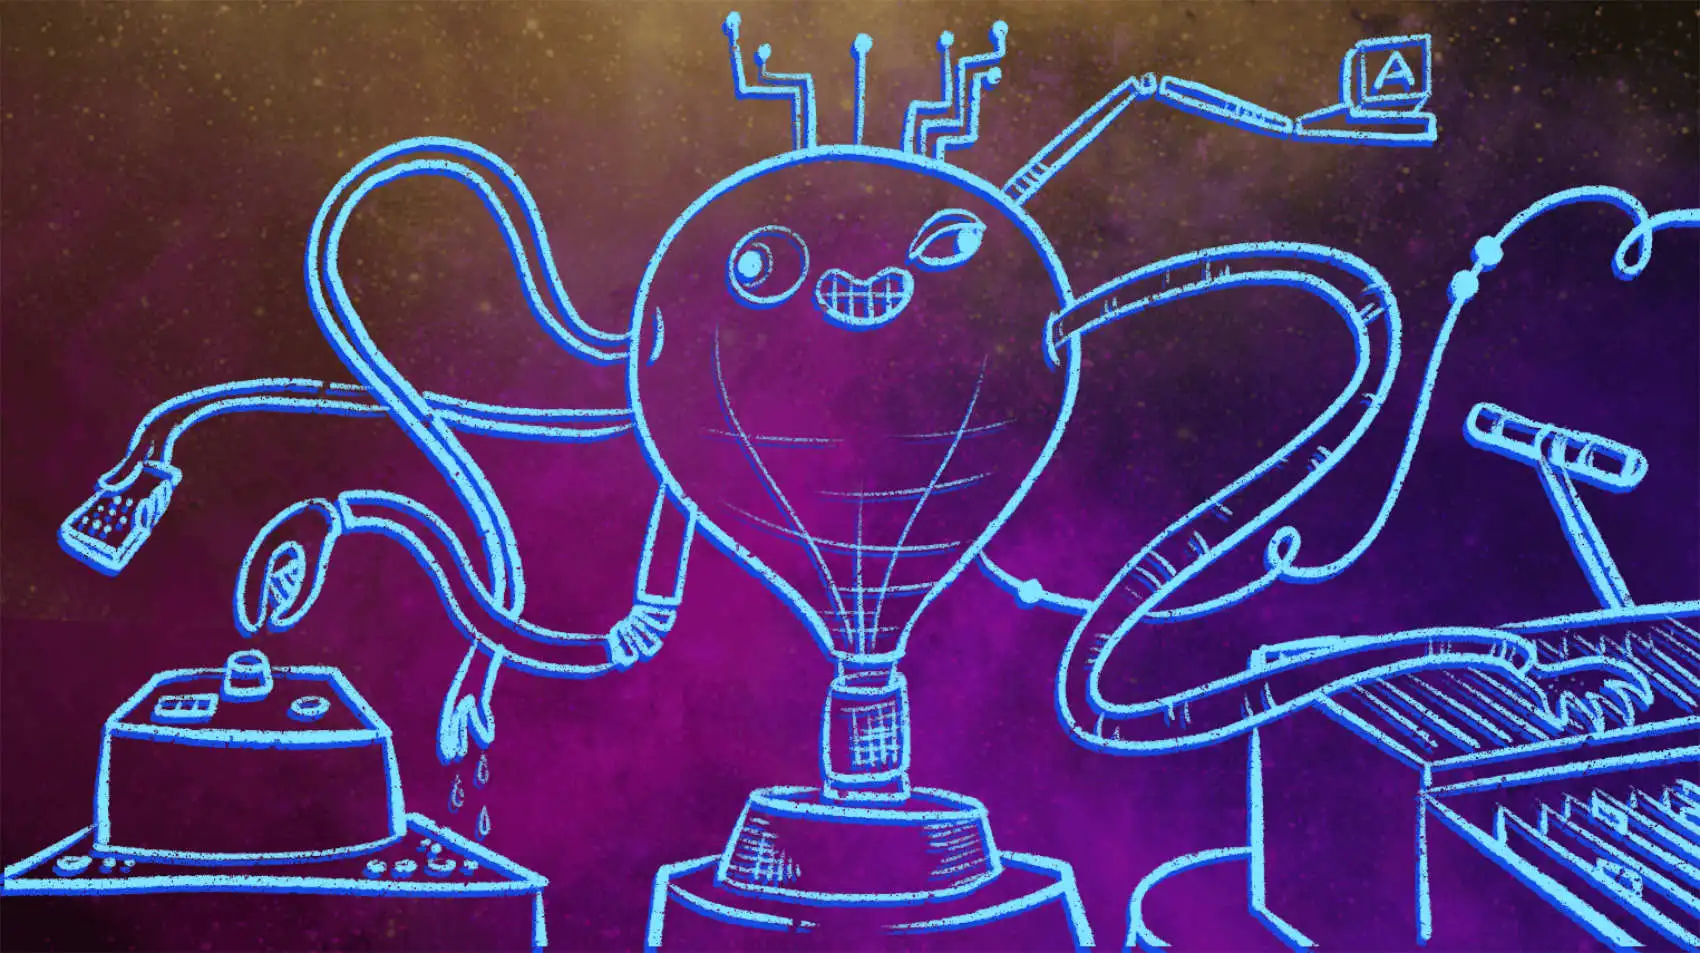 A space balloon creature with 6 hands. 3 On the left handles a remote, a button, and a droplet. 2 on the right holds a file and sifts through a record of documents separated into two boxes. The background is set in a gradiently pink and dark outerspace.